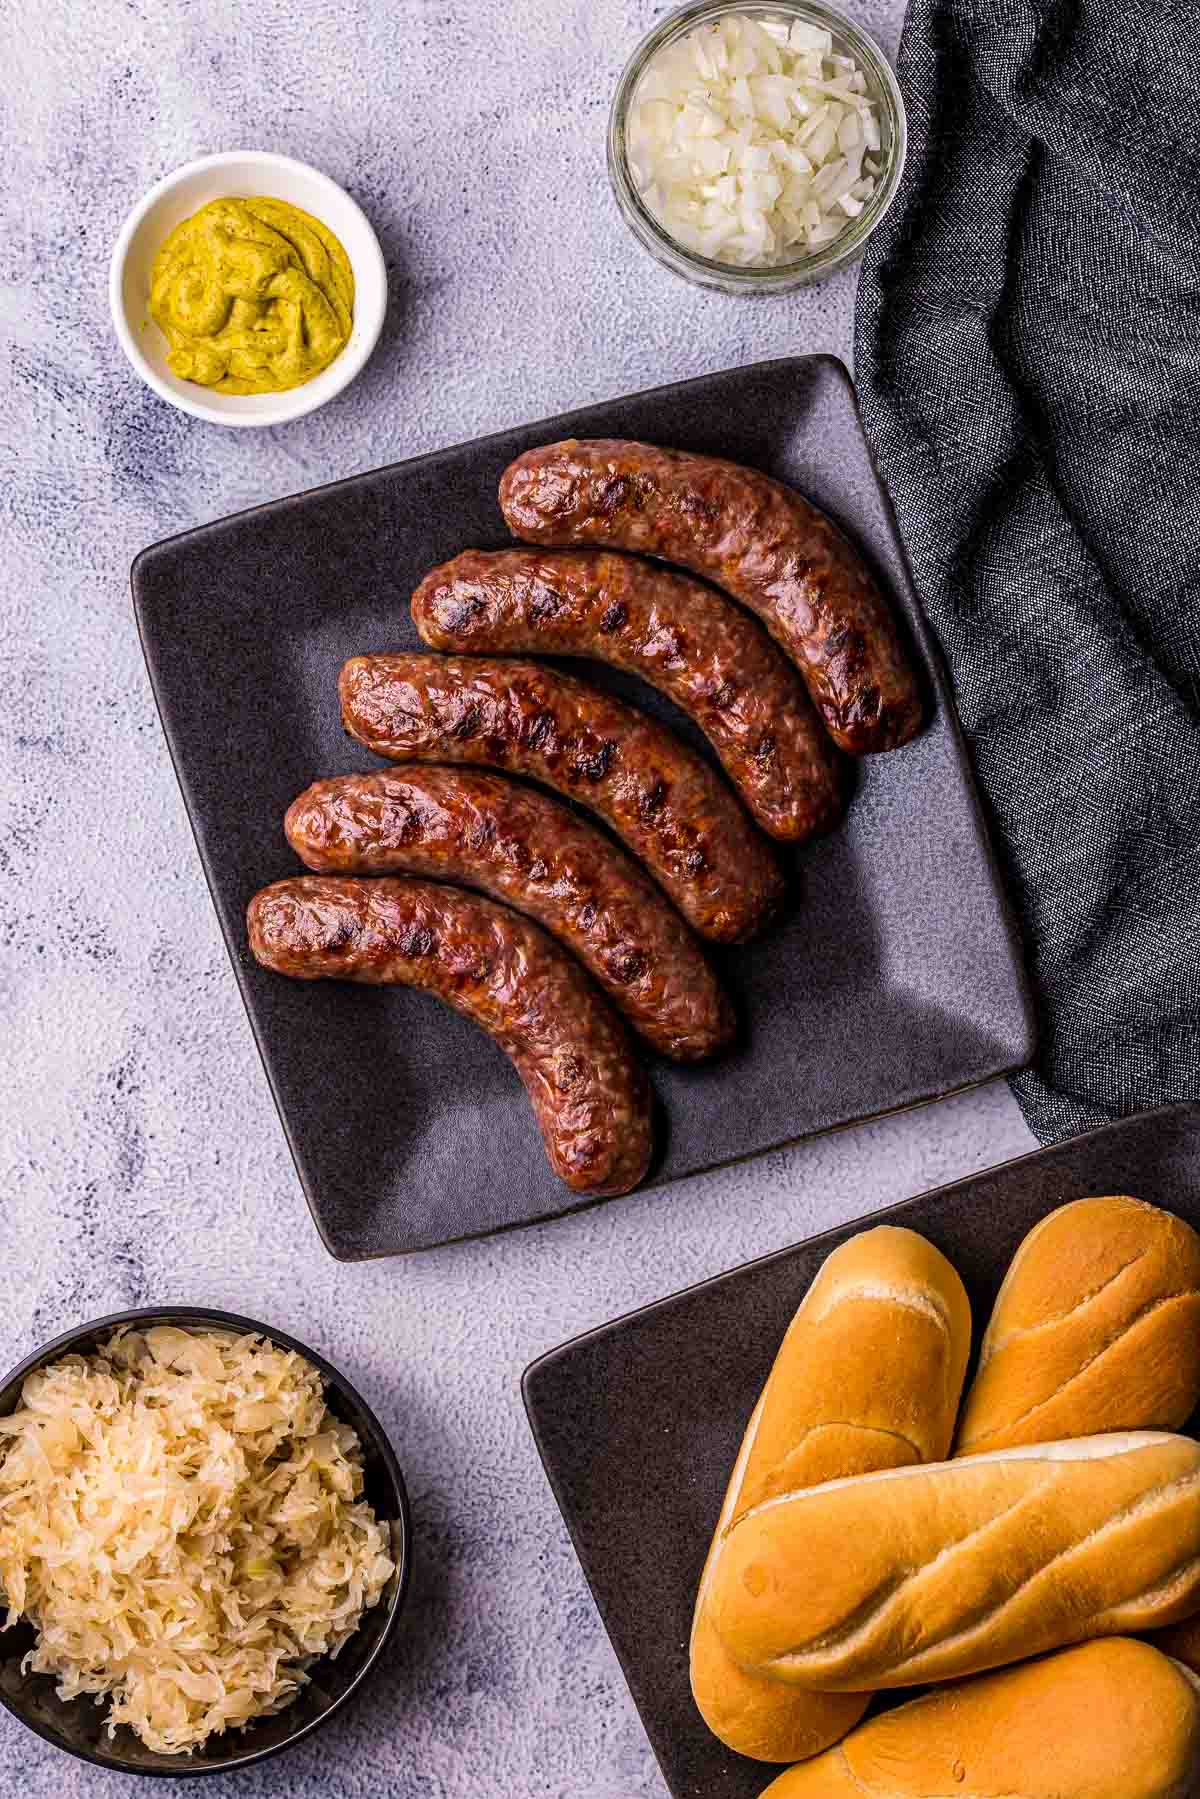 a plate of grilled sausages with buns, mustard and sauerkraut on the side